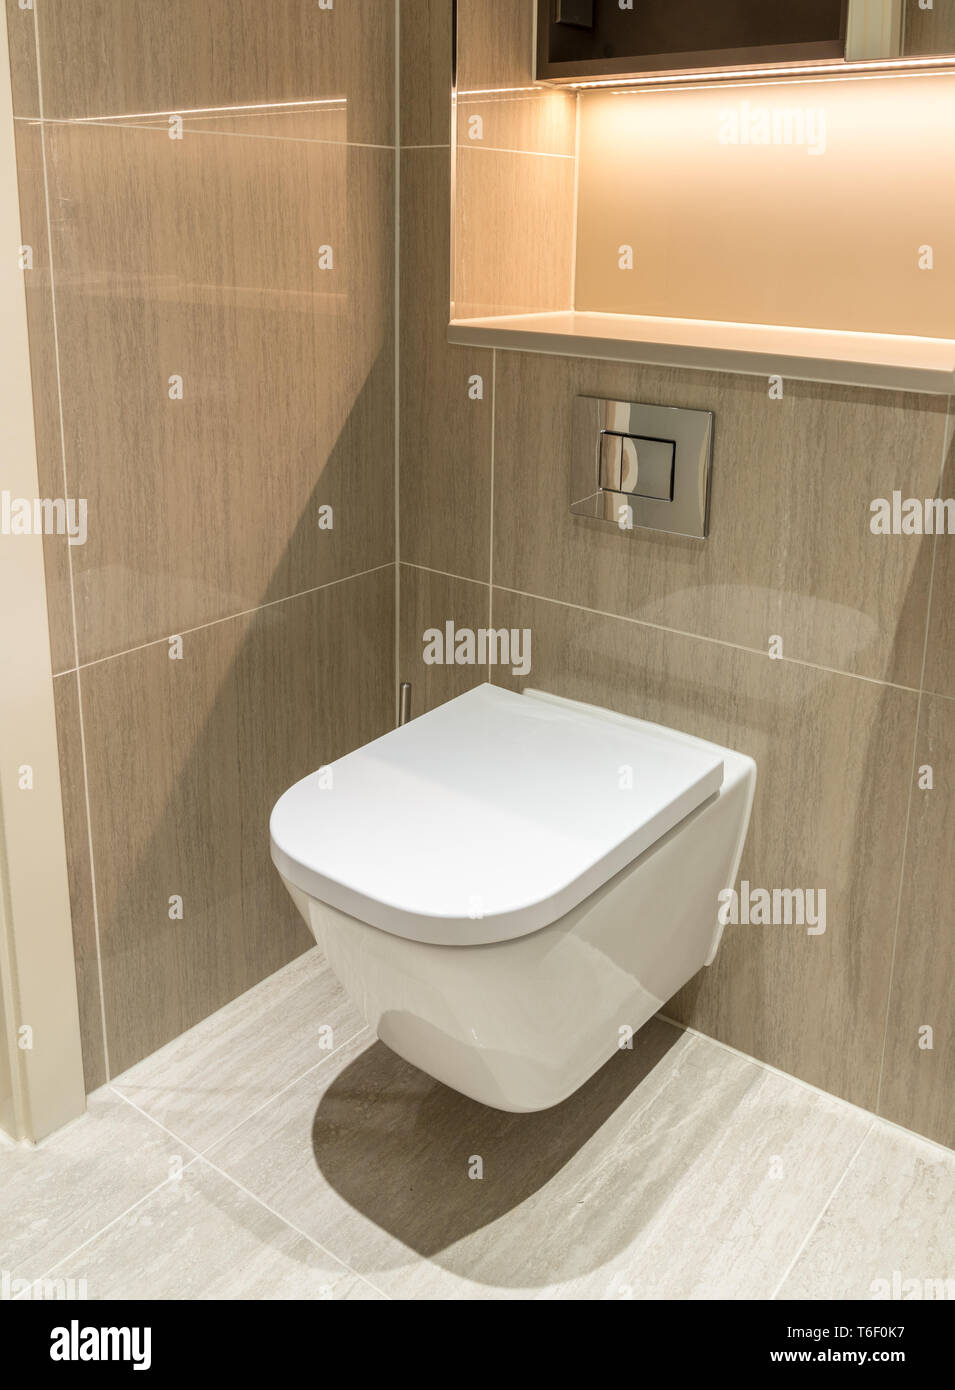 Modern toilet in flat or apartment suspended above tiled floor Stock Photo